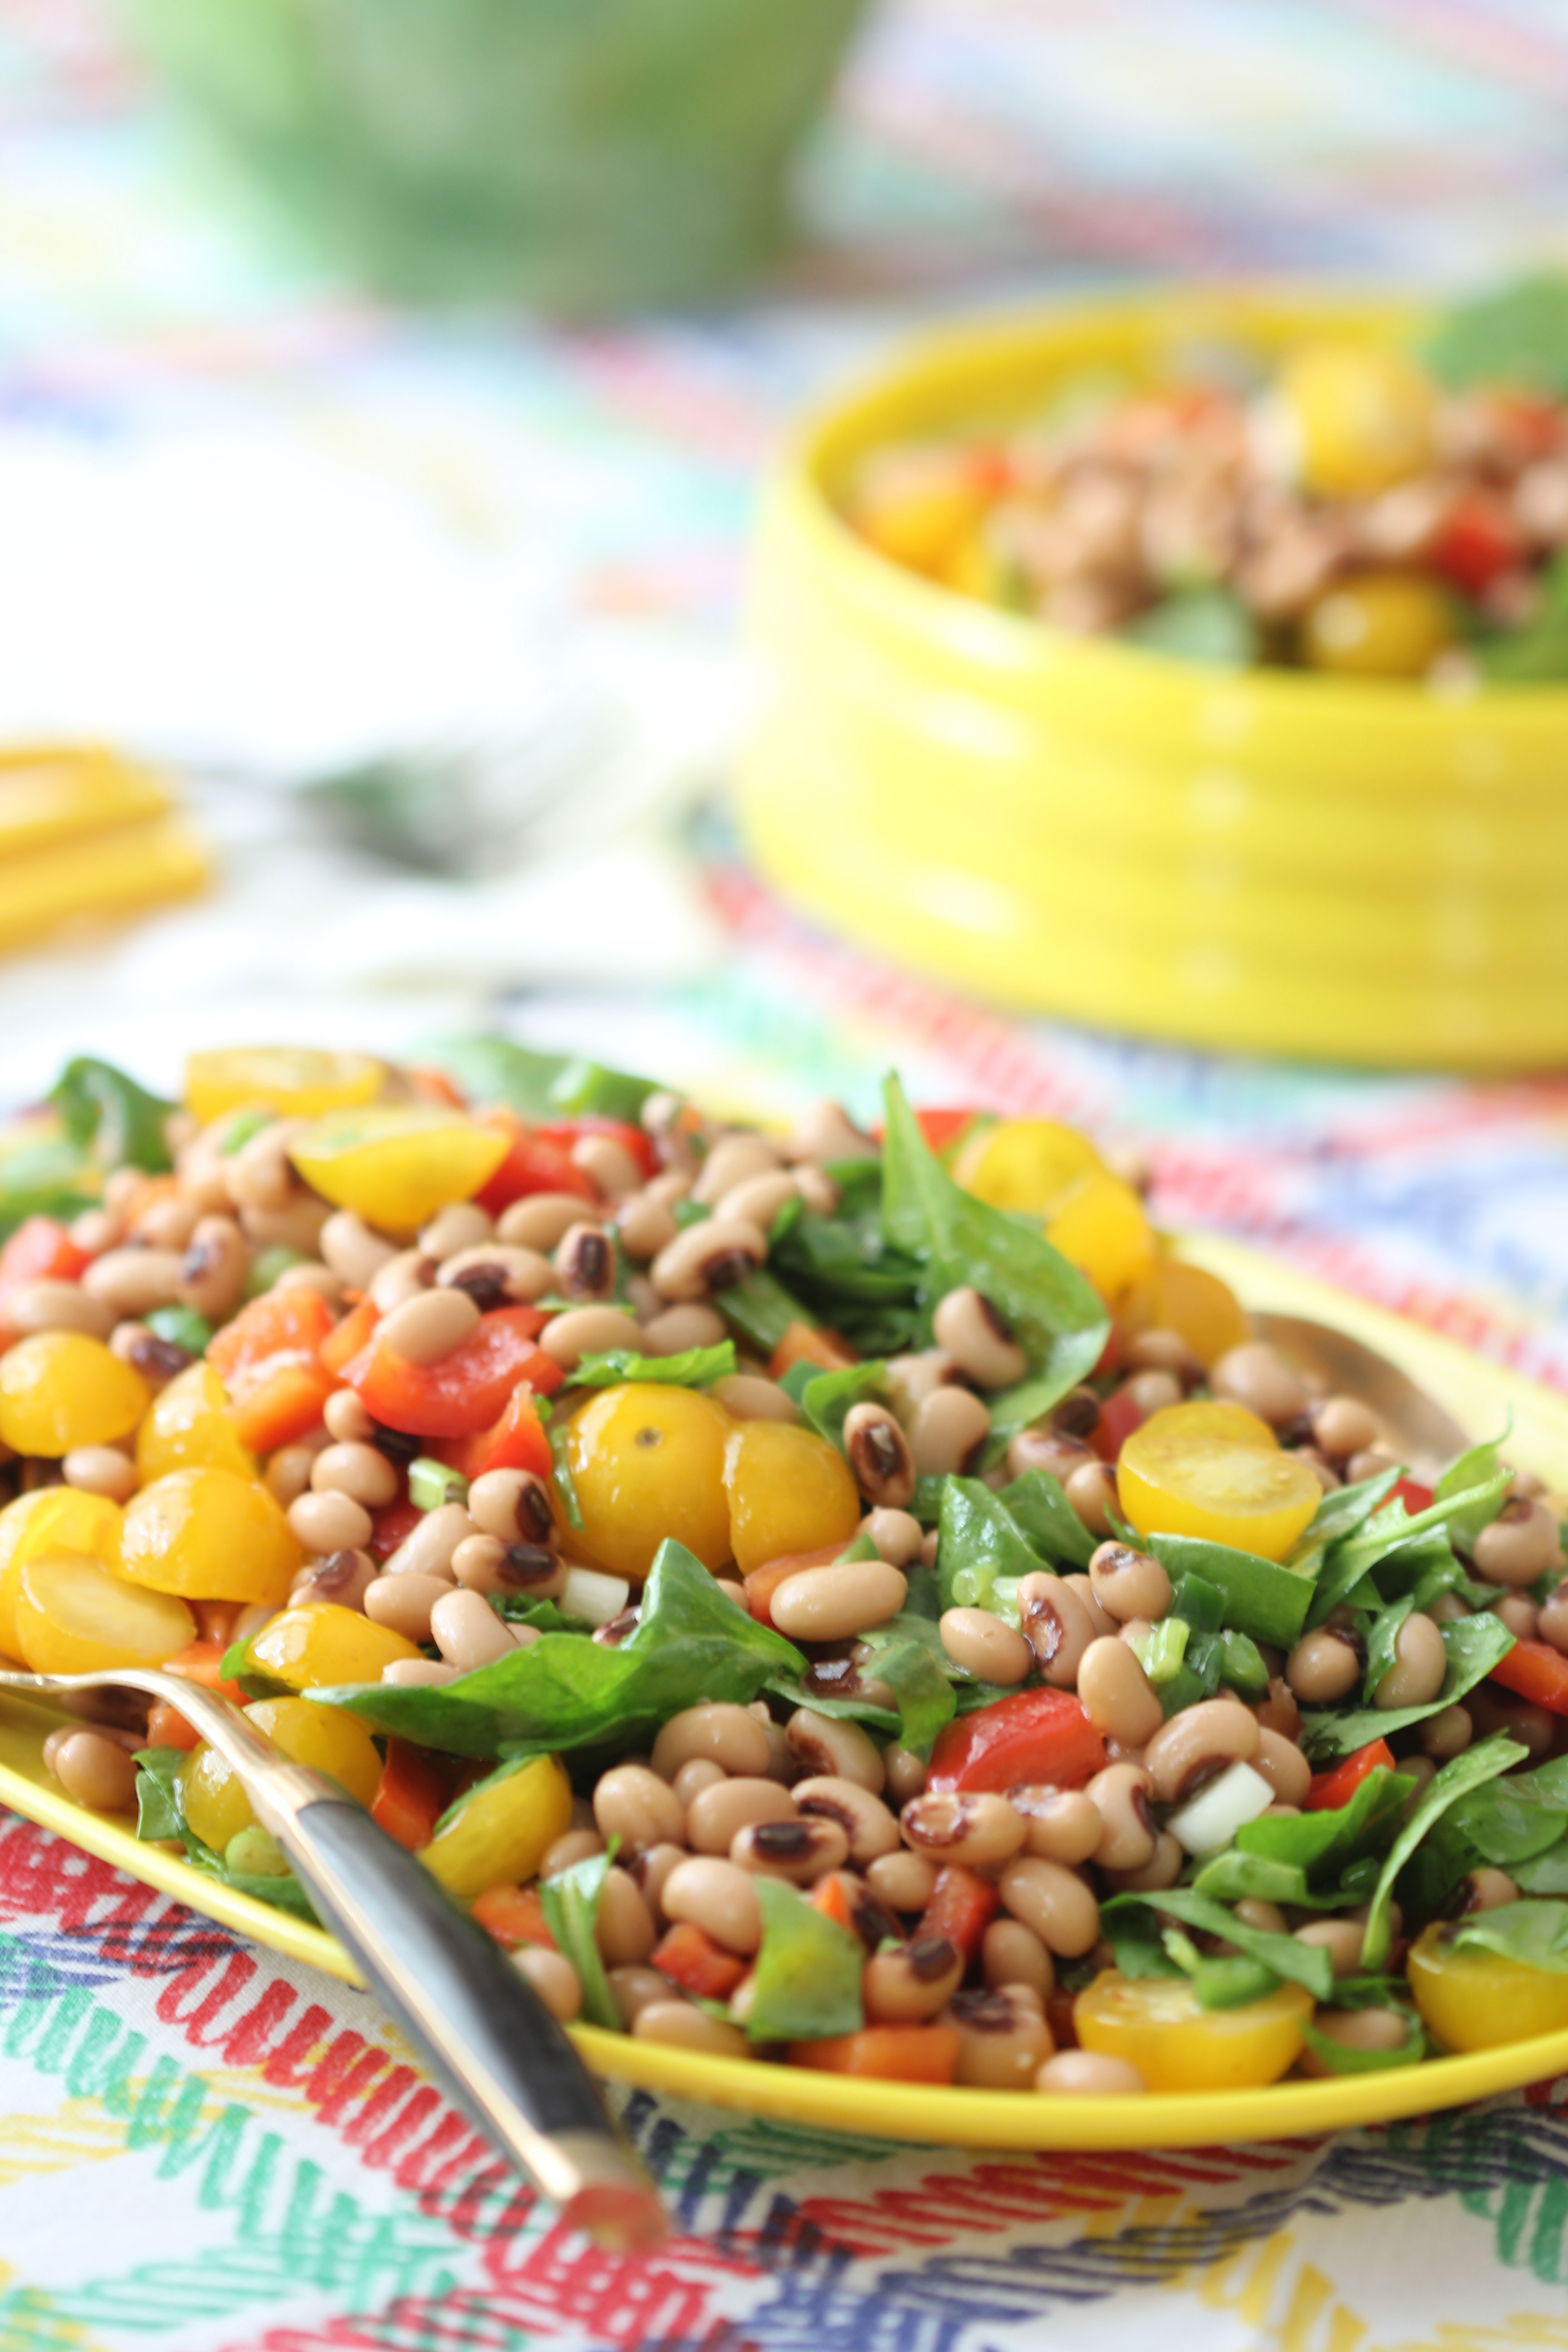 Ridgely Brode cooks up and shares the recipe for a delicious make ahead Black-Eyed Peas Salad on her blog, Ridgely's Radar.